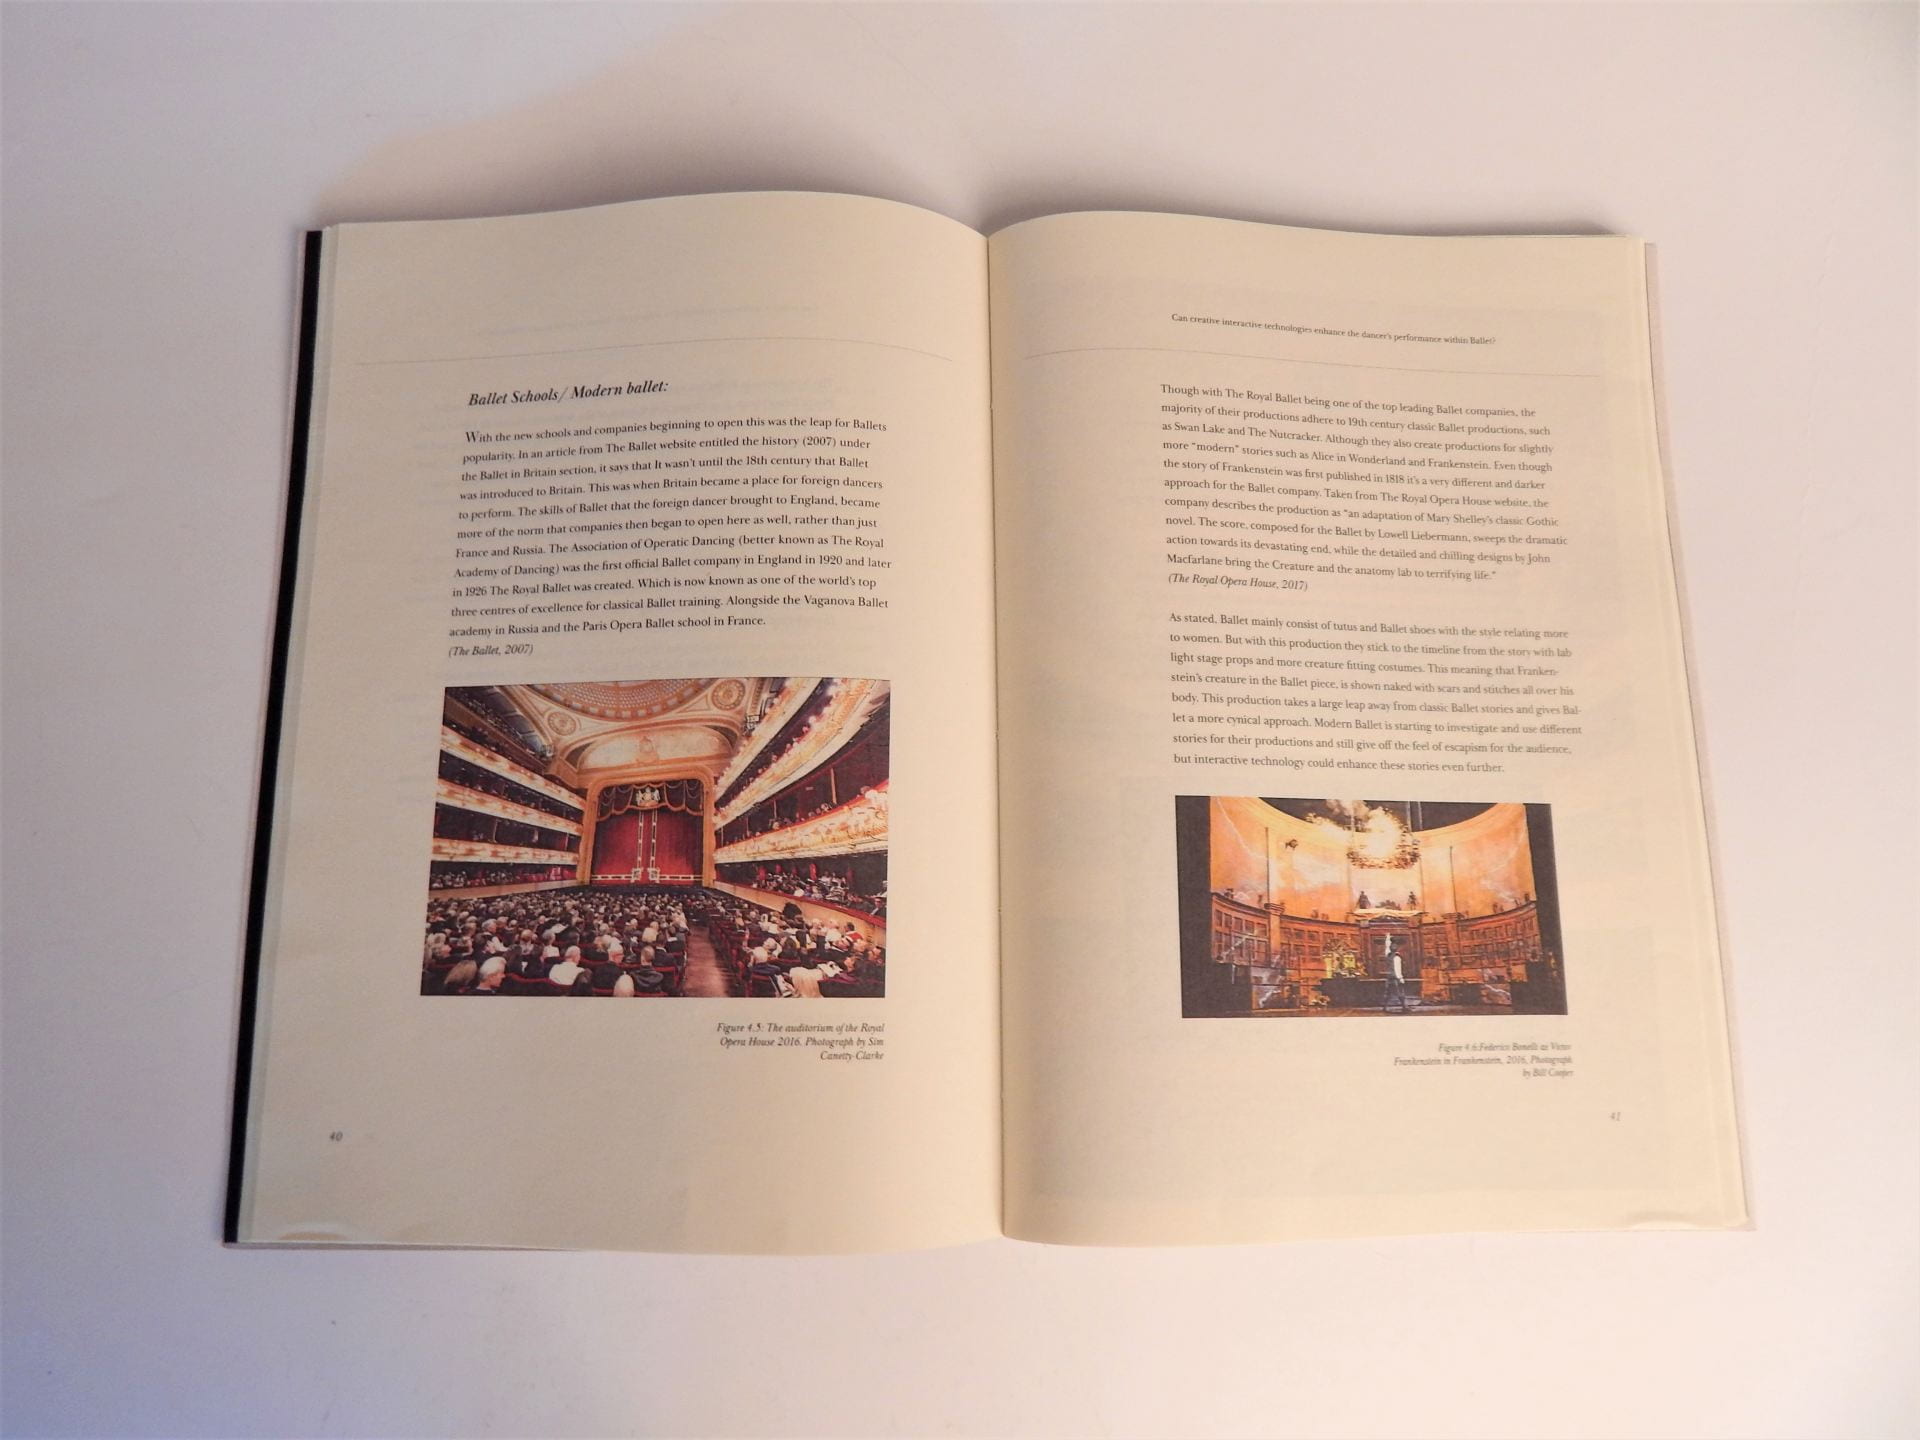 Dissertation paper open at chapter on 'Ballet Schools/Modern Ballet' with photographs of theatres.